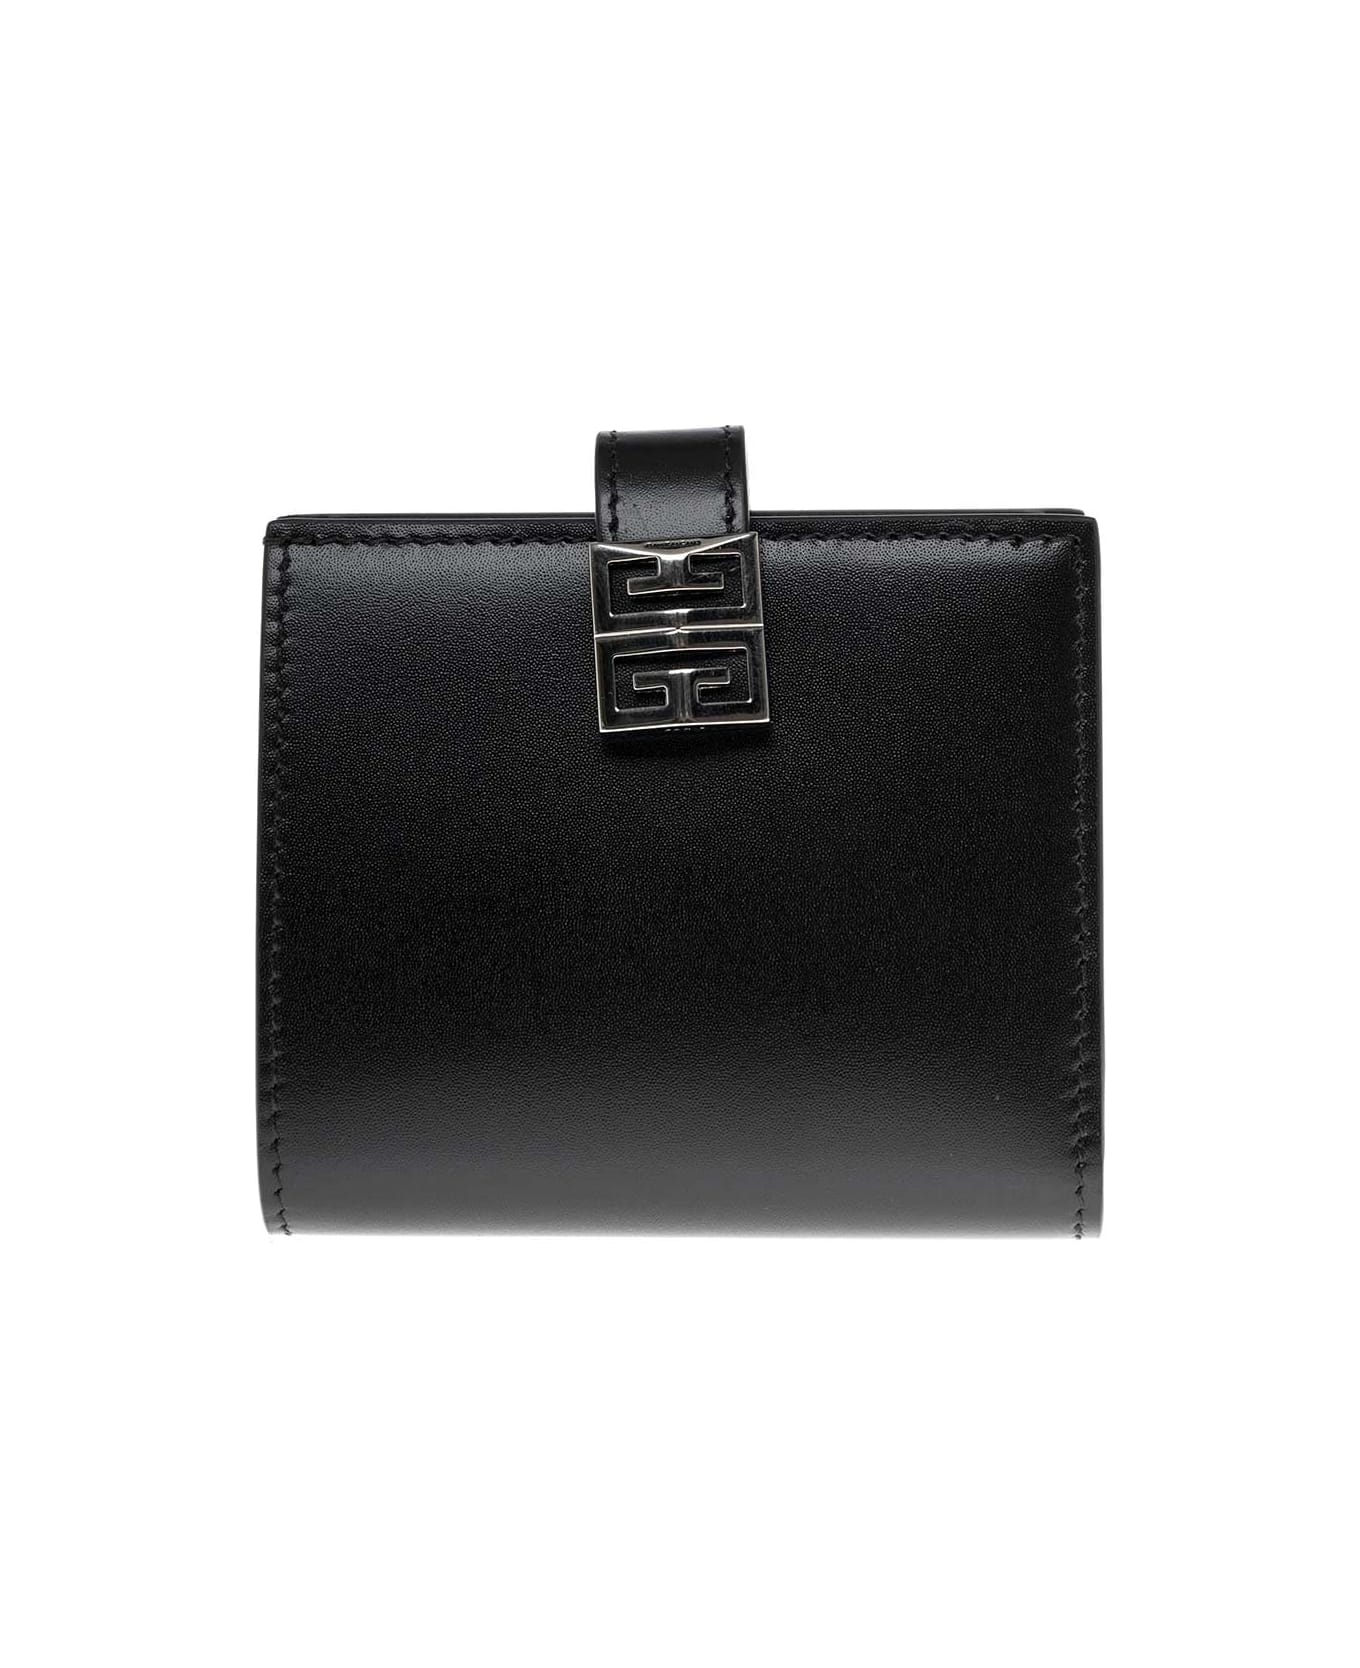 Givenchy Woman's Bifold Black Leather Wallet With 4g Logo - Black